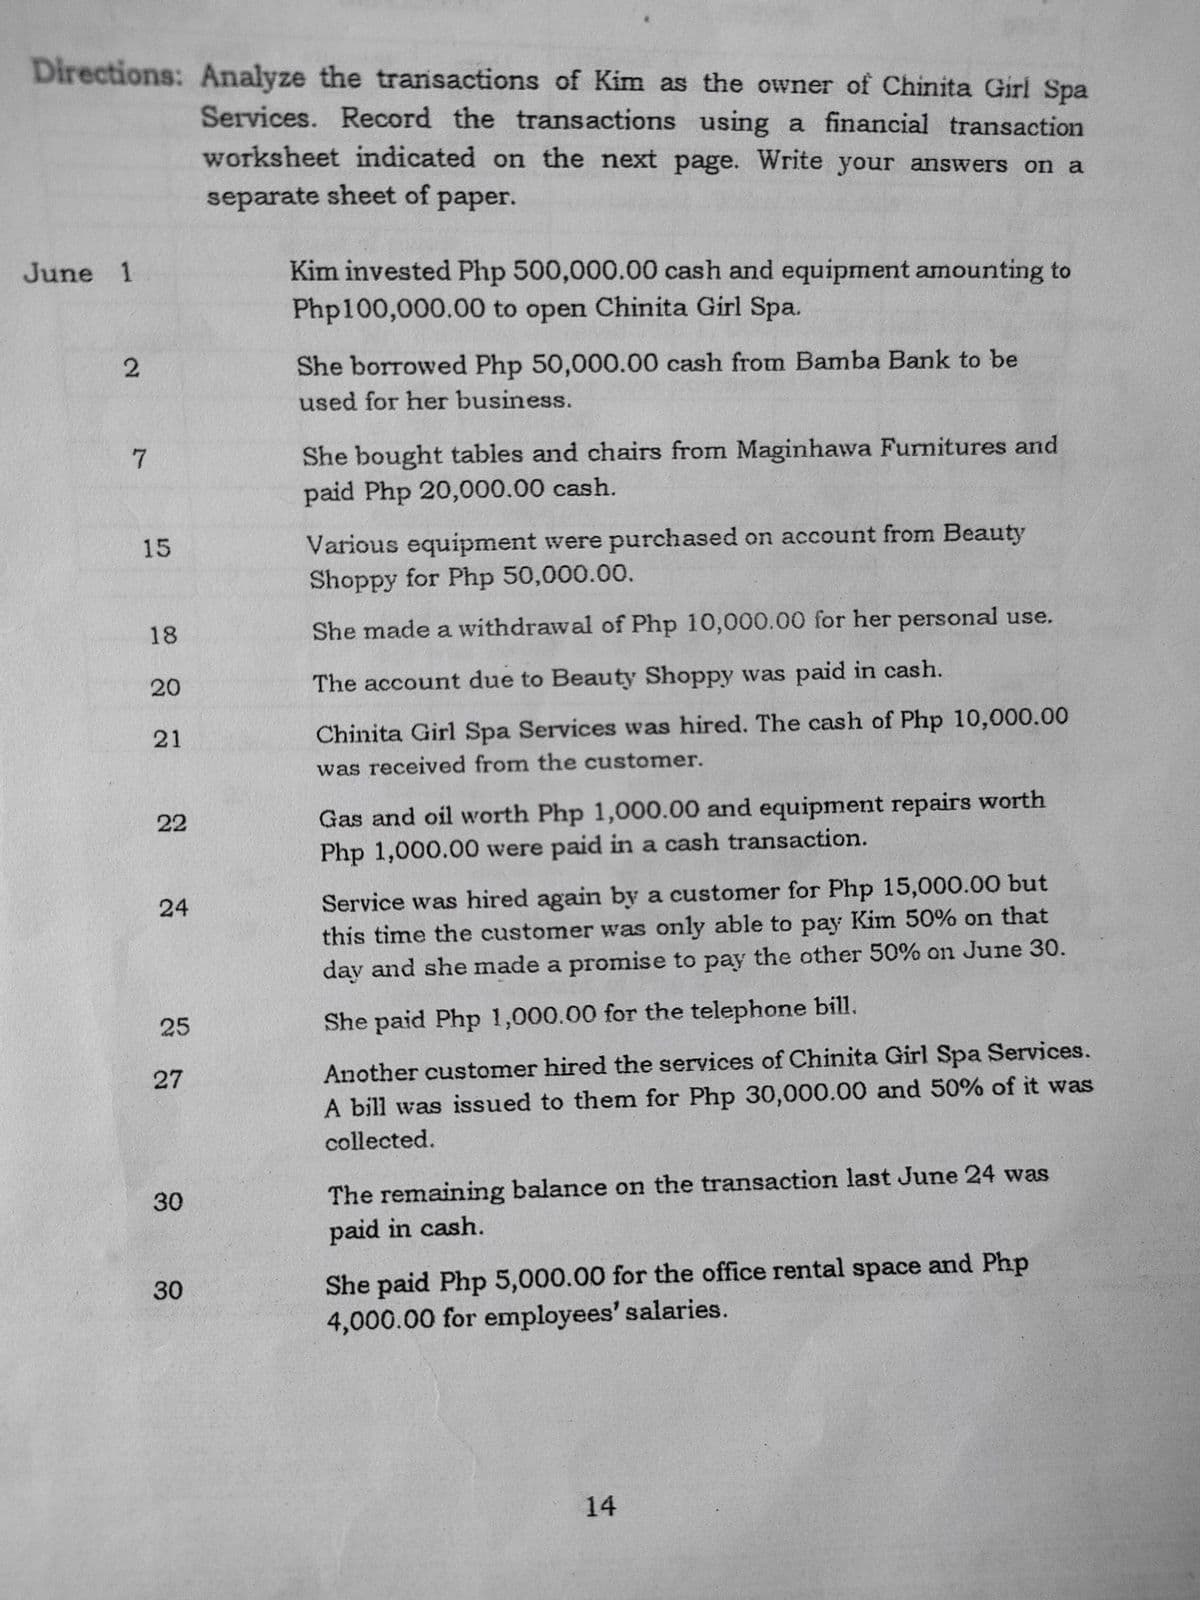 Directions: Analyze the transactions of Kim as the owner of Chinita Girl Spa
Services. Record the transactions using a financial transaction
worksheet indicated on the next page. Write your answers on a
separate sheet of paper.
June 1
Kim invested Php 500,000.00 cash and equipment amounting to
Php100,000.00 to open Chinita Girl Spa.
She borrowed Php 50,000.00 cash from Bamba Bank to be
used for her business.
She bought tables and chairs from Maginhawa Furnitures and
paid Php 20,000.00 cash.
Various equipment were purchased on account from Beauty
Shoppy for Php 50,000.00.
15
18
She made a withdrawal of Php 10,000.00 for her personal use.
20
The account due to Beauty Shoppy was paid in cash.
21
Chinita Girl Spa Services was hired. The cash of Php 10,000.00
was received from the customer.
Gas and oil worth Php 1,000.00 and equipment repairs worth
Php 1,000.00 were paid in a cash transaction.
22
Service was hired again by a customer for Php 15,000.00 but
this time the customer was only able to pay Kim 50% on that
day and she made a promise to pay the other 50% on June 30.
24
25
She paid Php 1,000.00 for the telephone bill.
27
Another customer hired the services of Chinita Girl Spa Services.
A bill was issued to them for Php 30,000.00 and 50% of it was
collected.
30
The remaining balance on the transaction last June 24 was
paid in cash.
30
She paid Php 5,000.00 for the office rental space and Php
4,000.00 for employees' salaries.
14
2.
